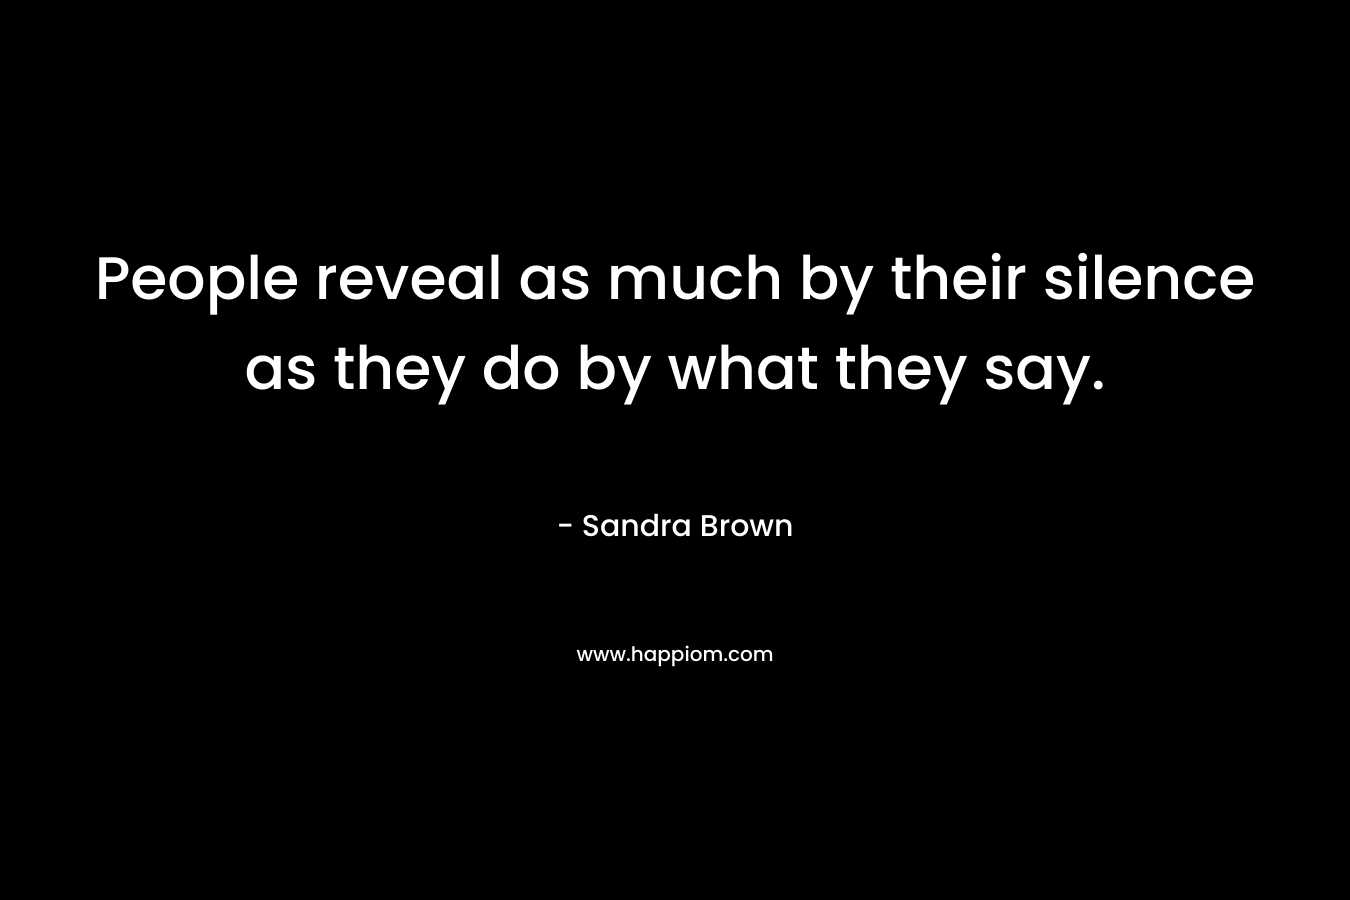 People reveal as much by their silence as they do by what they say.